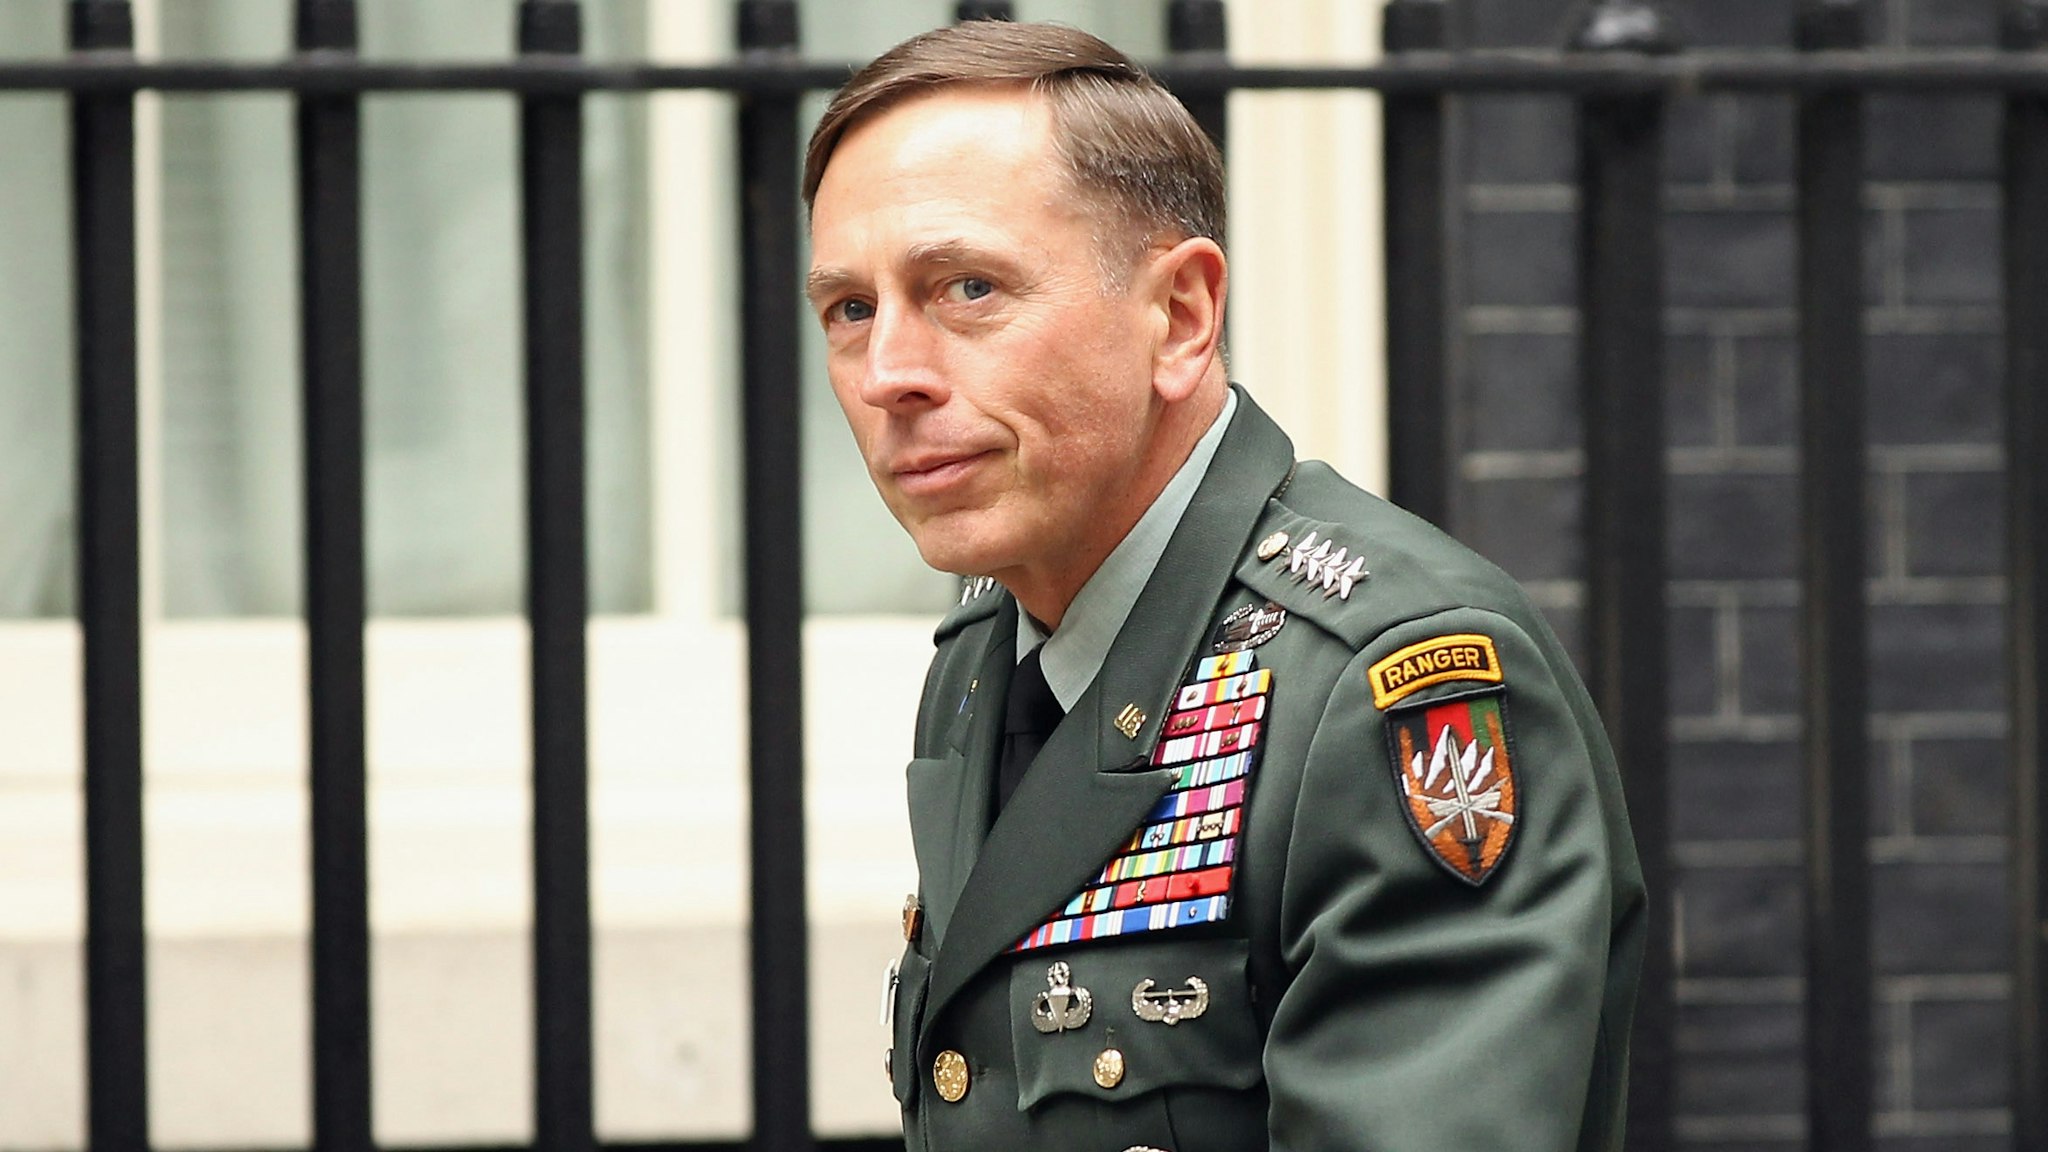 LONDON, ENGLAND - OCTOBER 14: General David Petraeus arrives at 10 Downing Street to meet British Prime Minister David Cameron on October 14, 2010 in London, England. Petraeus, the top US commander in Afghanistan, has called for an investigation into the death of British aid worker Linda Norgrove, who was held hostage in Afghanistan. Ms Norgrove died after a failed rescue opperation by US forces on October 8, 2010 in Afghanistan.